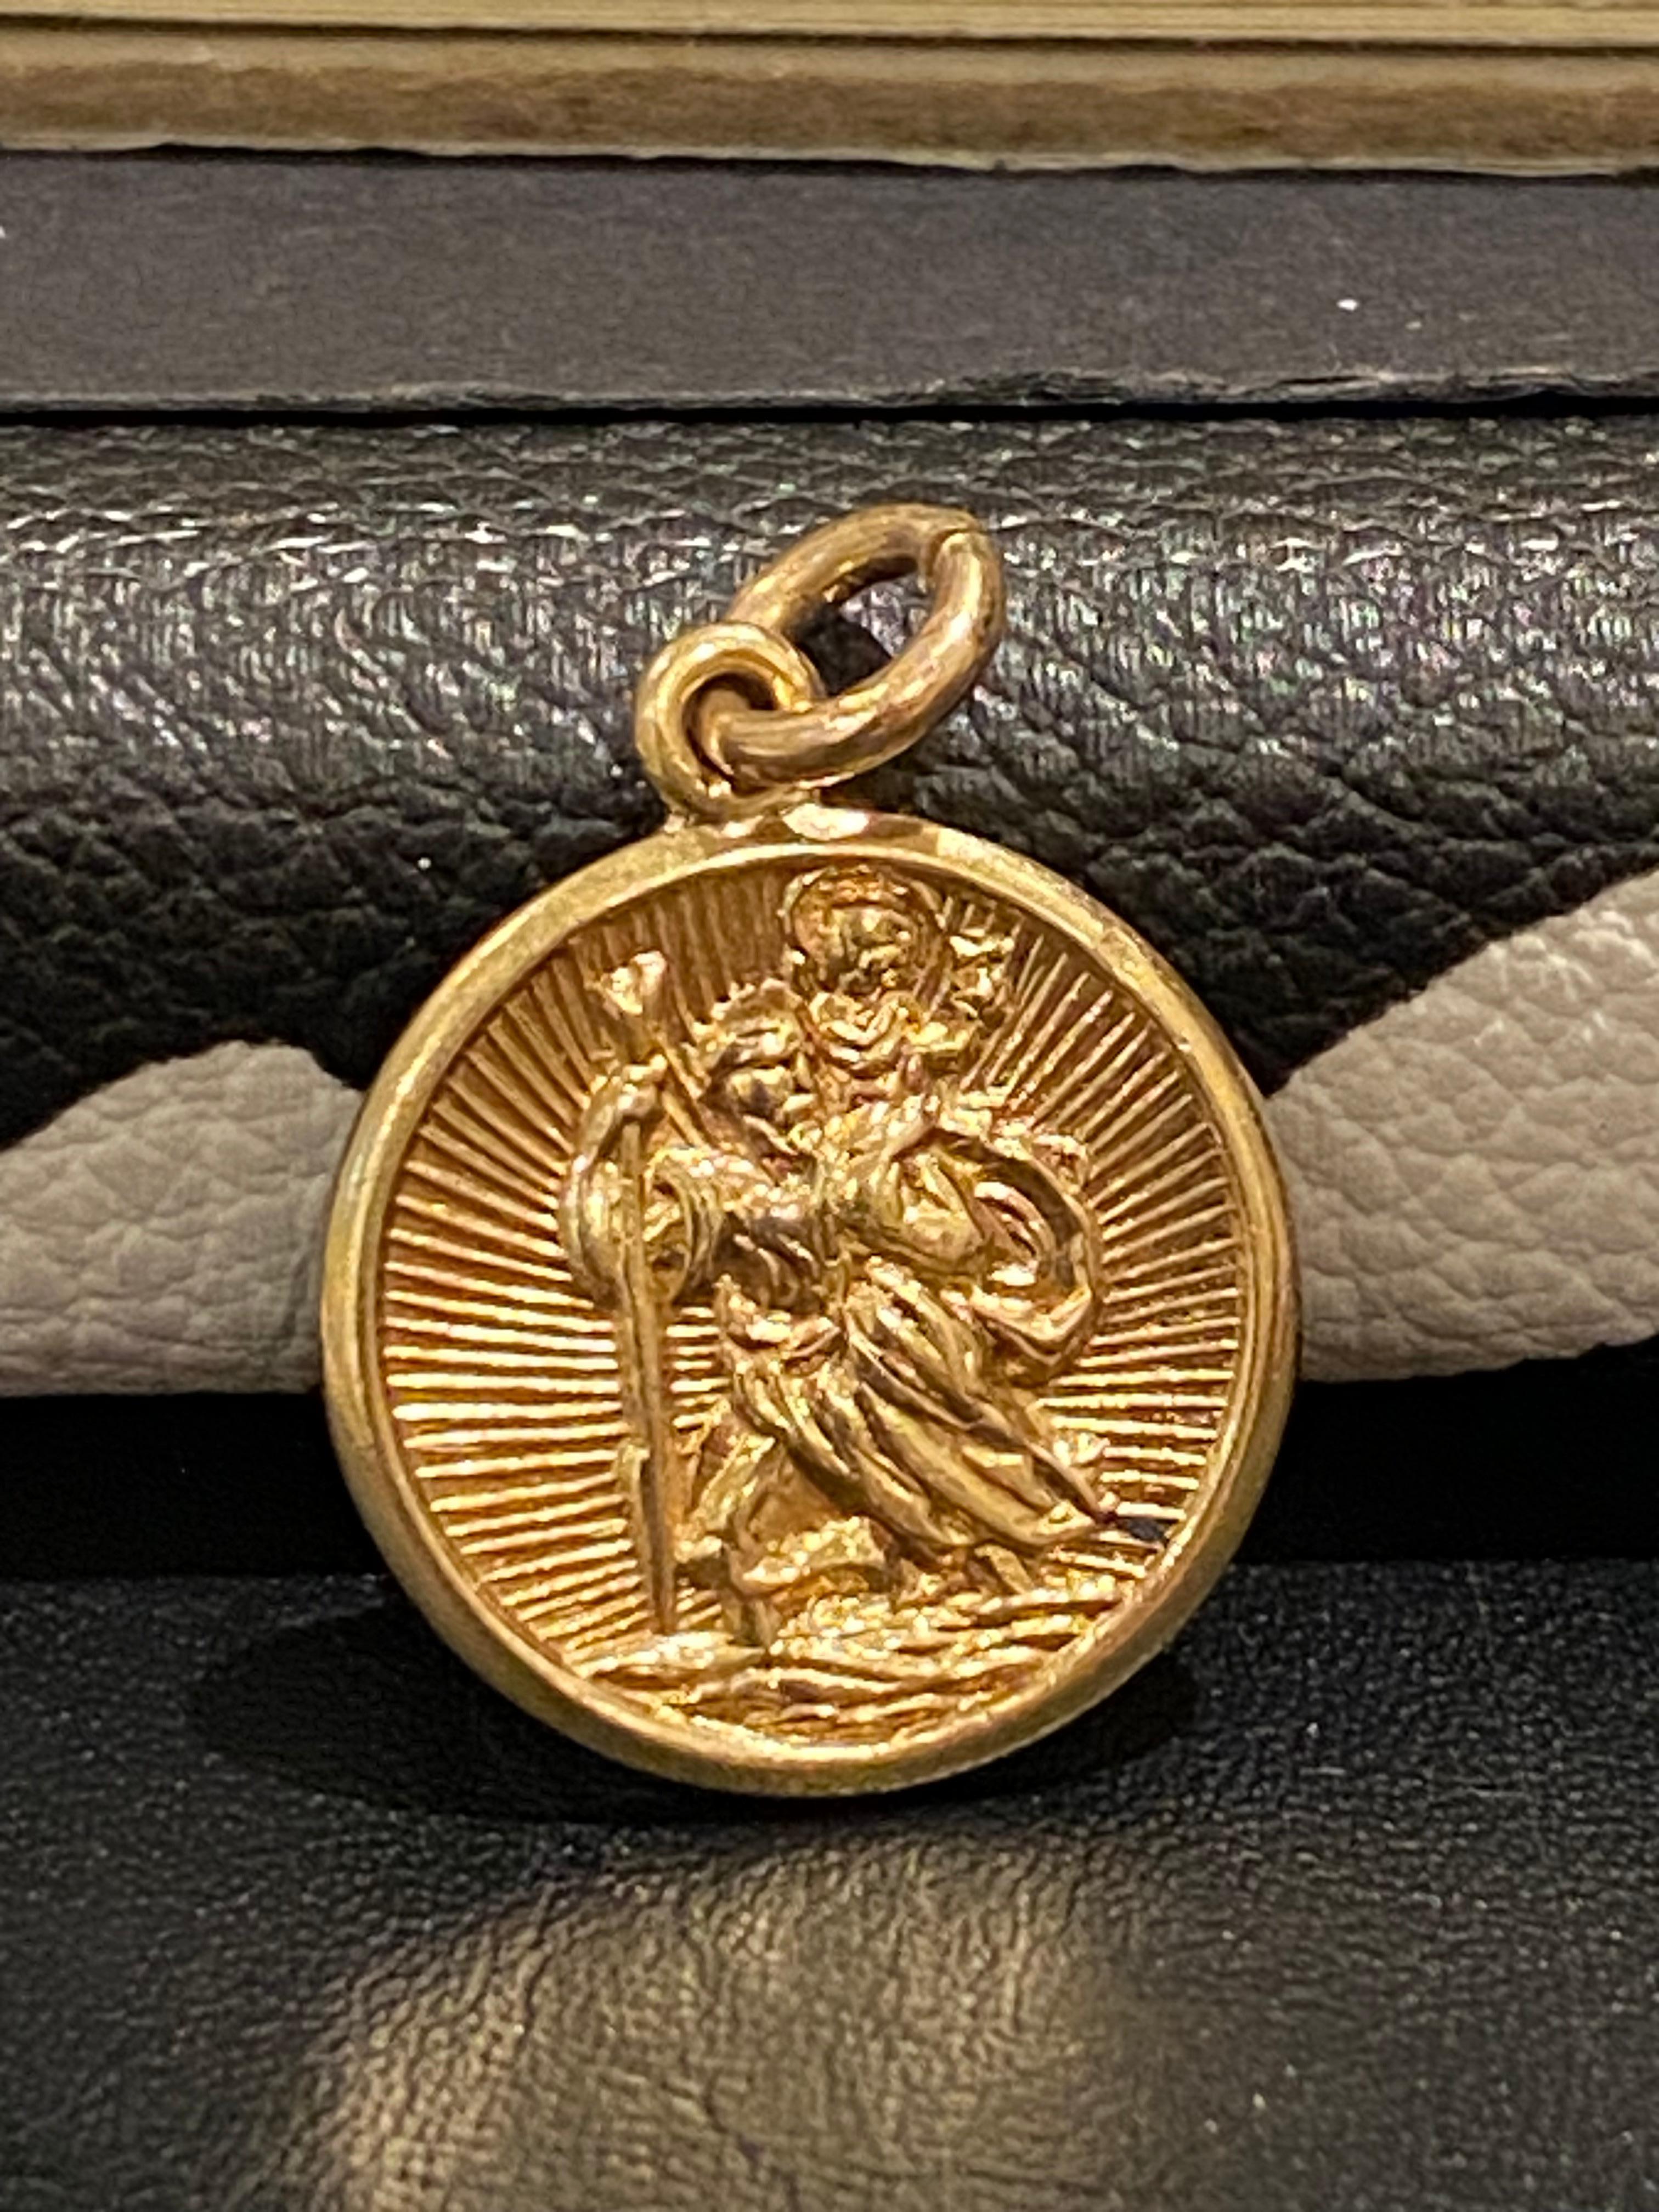 Intricately designed as a coin, 

this exquisite charm is finely embossed

with image of Olympian Poseidon - 

presiding over the sea, storms, earthquakes & horses  

  

Performed in 9K yellow gold & 

exquisitely detailed throughout

 

Bearing